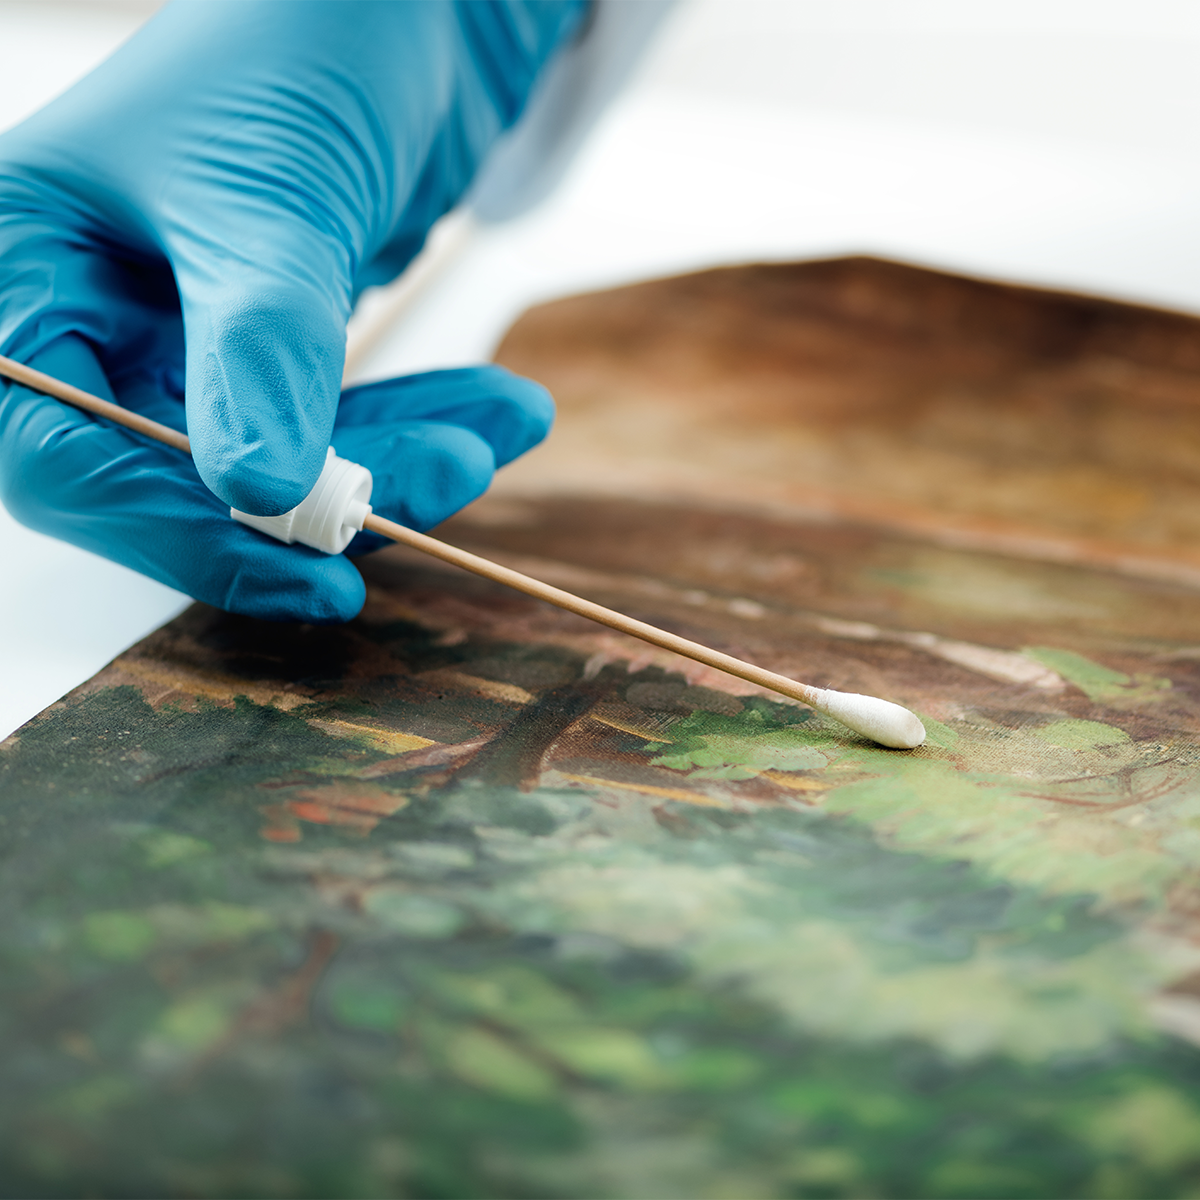 Restoration of Art and Documents